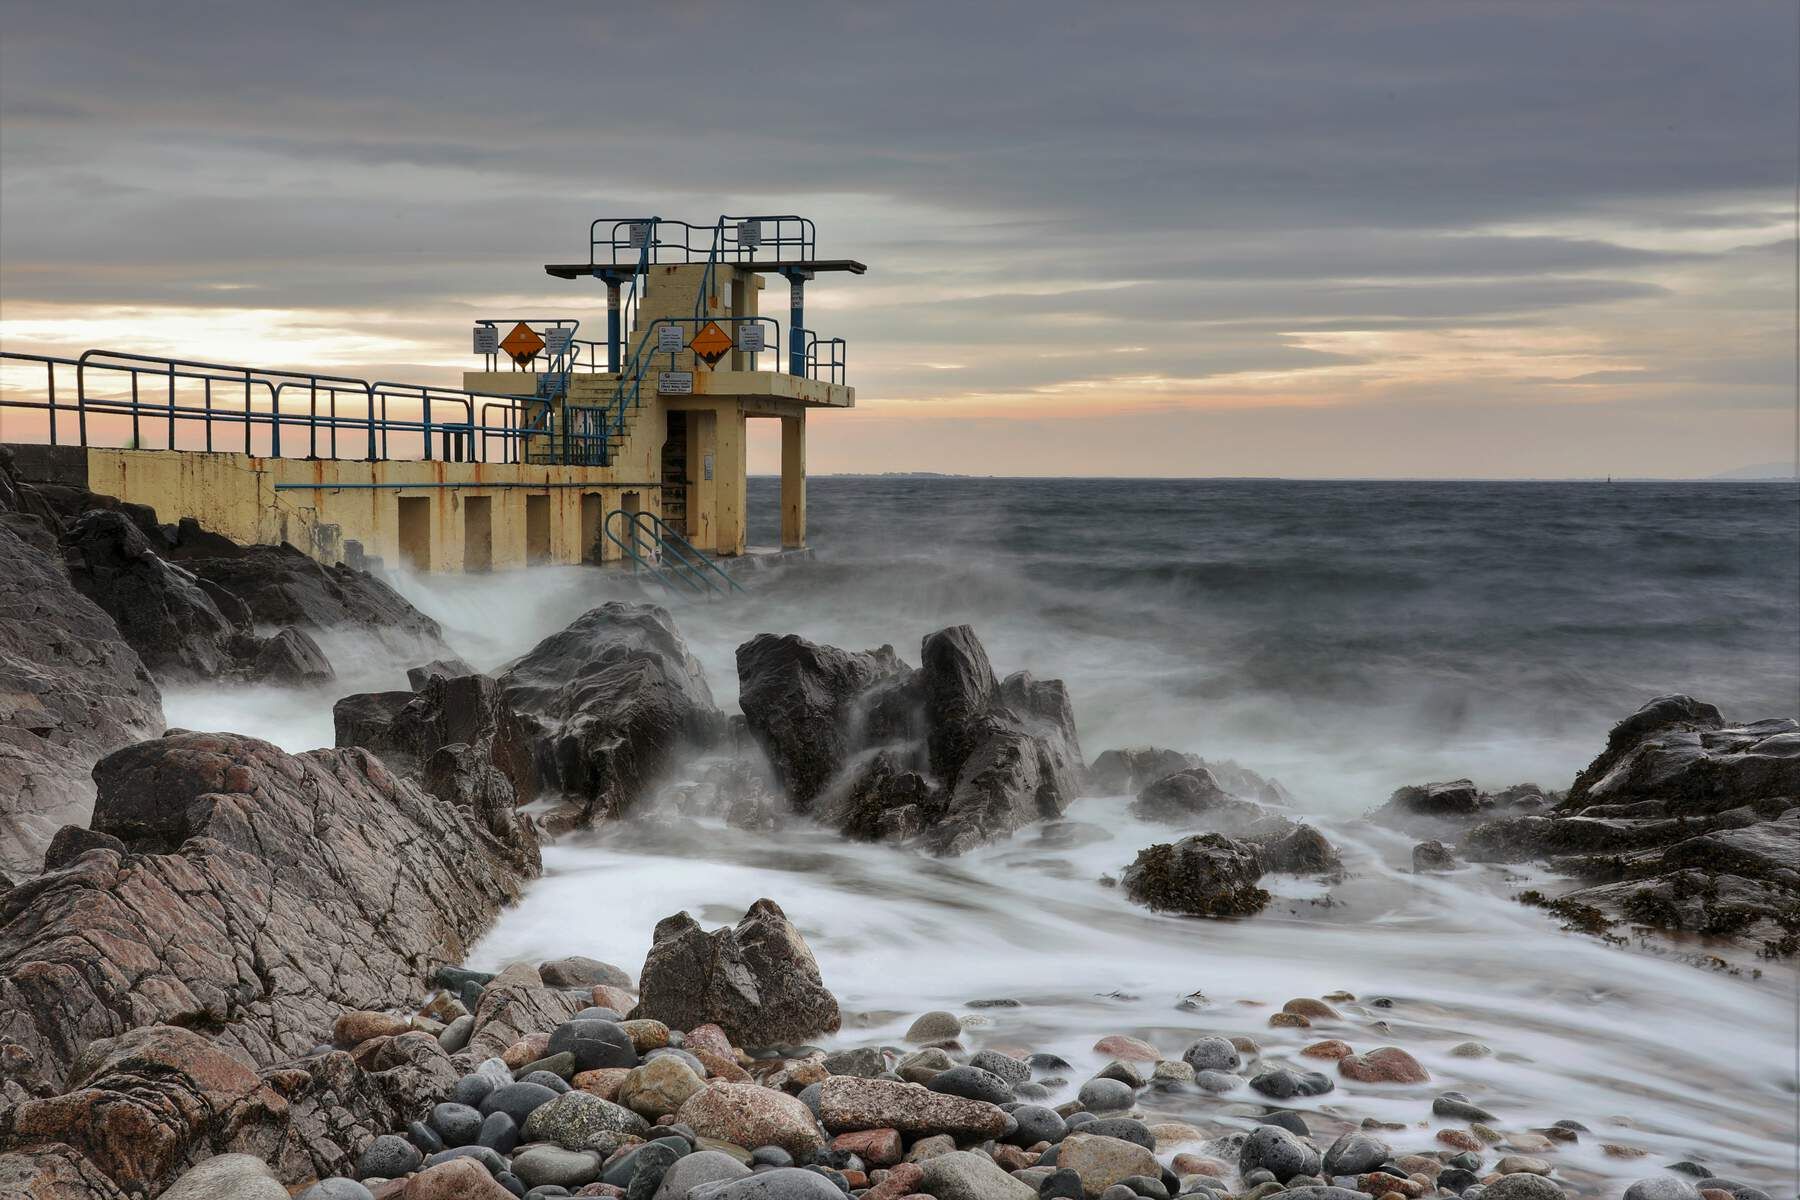 Blackrock Diving Tower, Salthill, Co Galway. Credit: Tourism Ireland